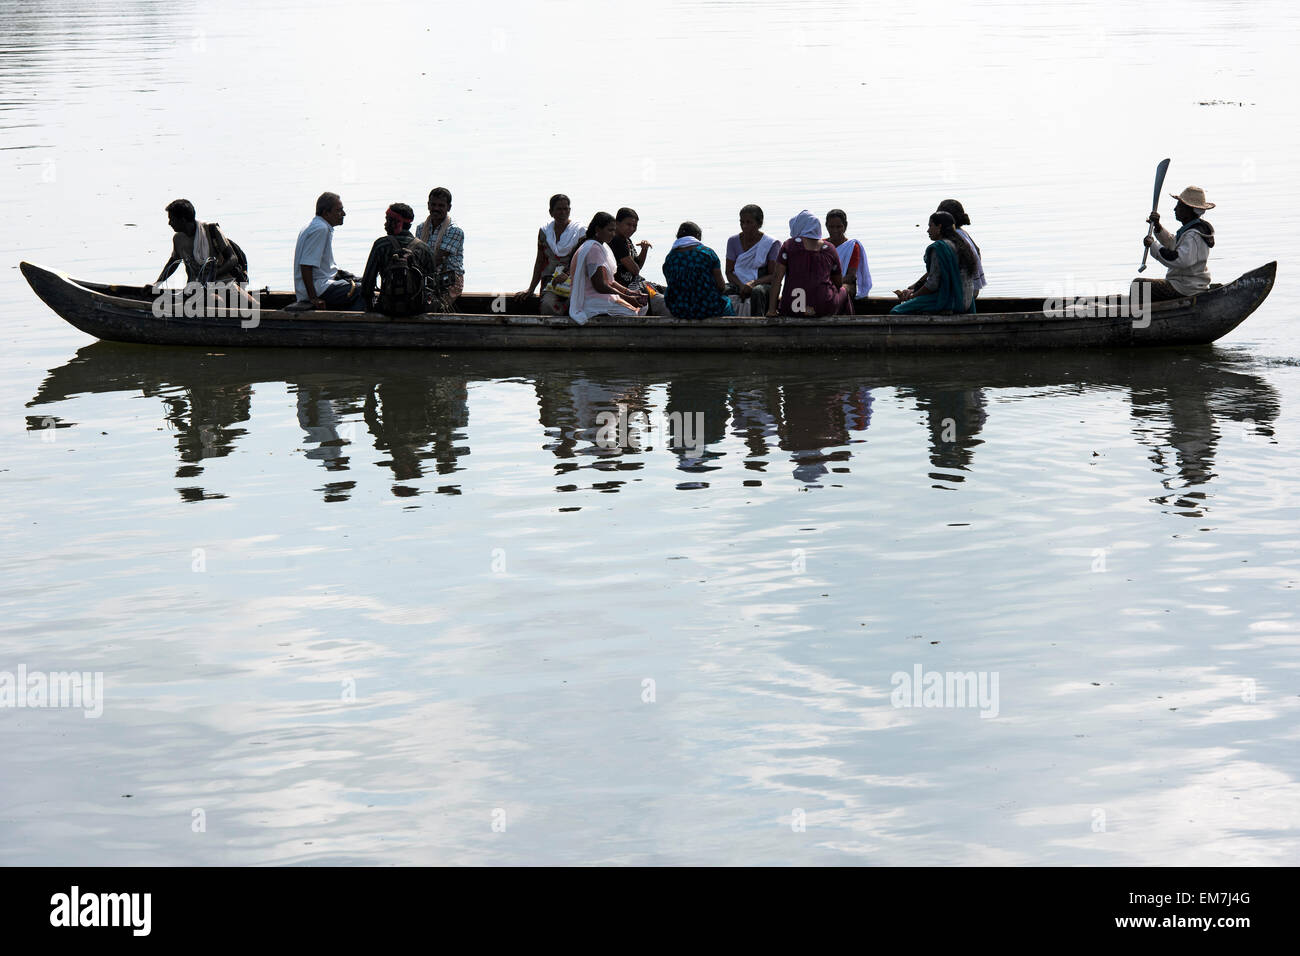 Small boat with passengers, Backwaters canal system in Alappuzha, Kerala, India Stock Photo